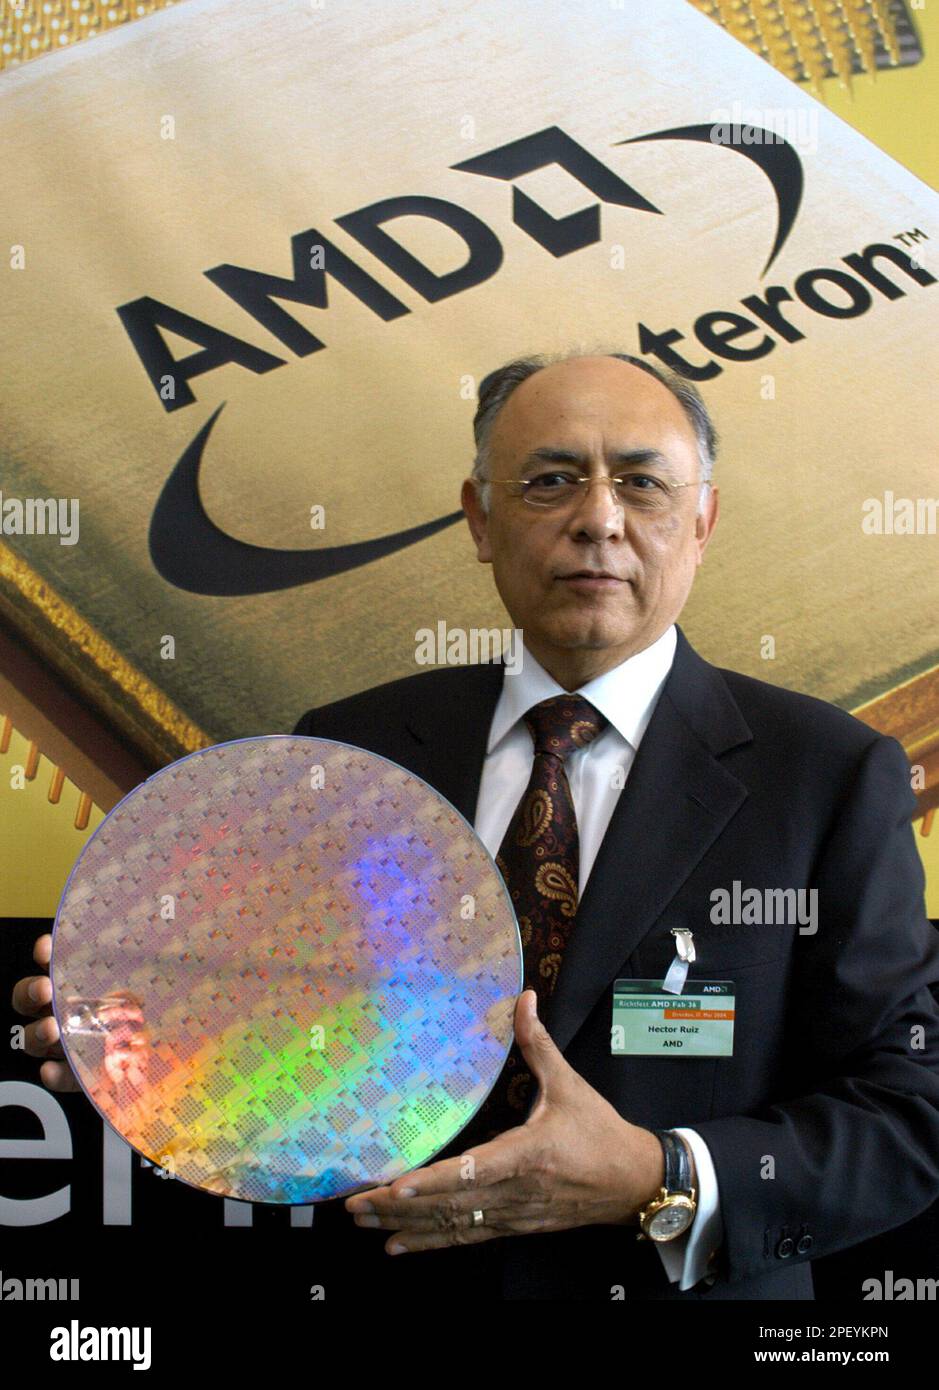 Hector Ruiz, Chairman of the Board and CEO of AMD, Advanced Micro Devices, poses with a 300 Millimeter wafer prior to the beginning of the topping-off ceremony for AMD`s extension wing Fab 36, in Dresden, Germany, Monday, May 17, 2004. AMD, a global semiconductor company, based in Sunnyvale, Calif., opened its biggest wafer production line, the Fab 30, outside the U.S. in Dresden in 1999 and is celebrating the topping-off of the new Fab 36 hall on Monday. (AP photo/Matthias Rietschel) Foto Stock